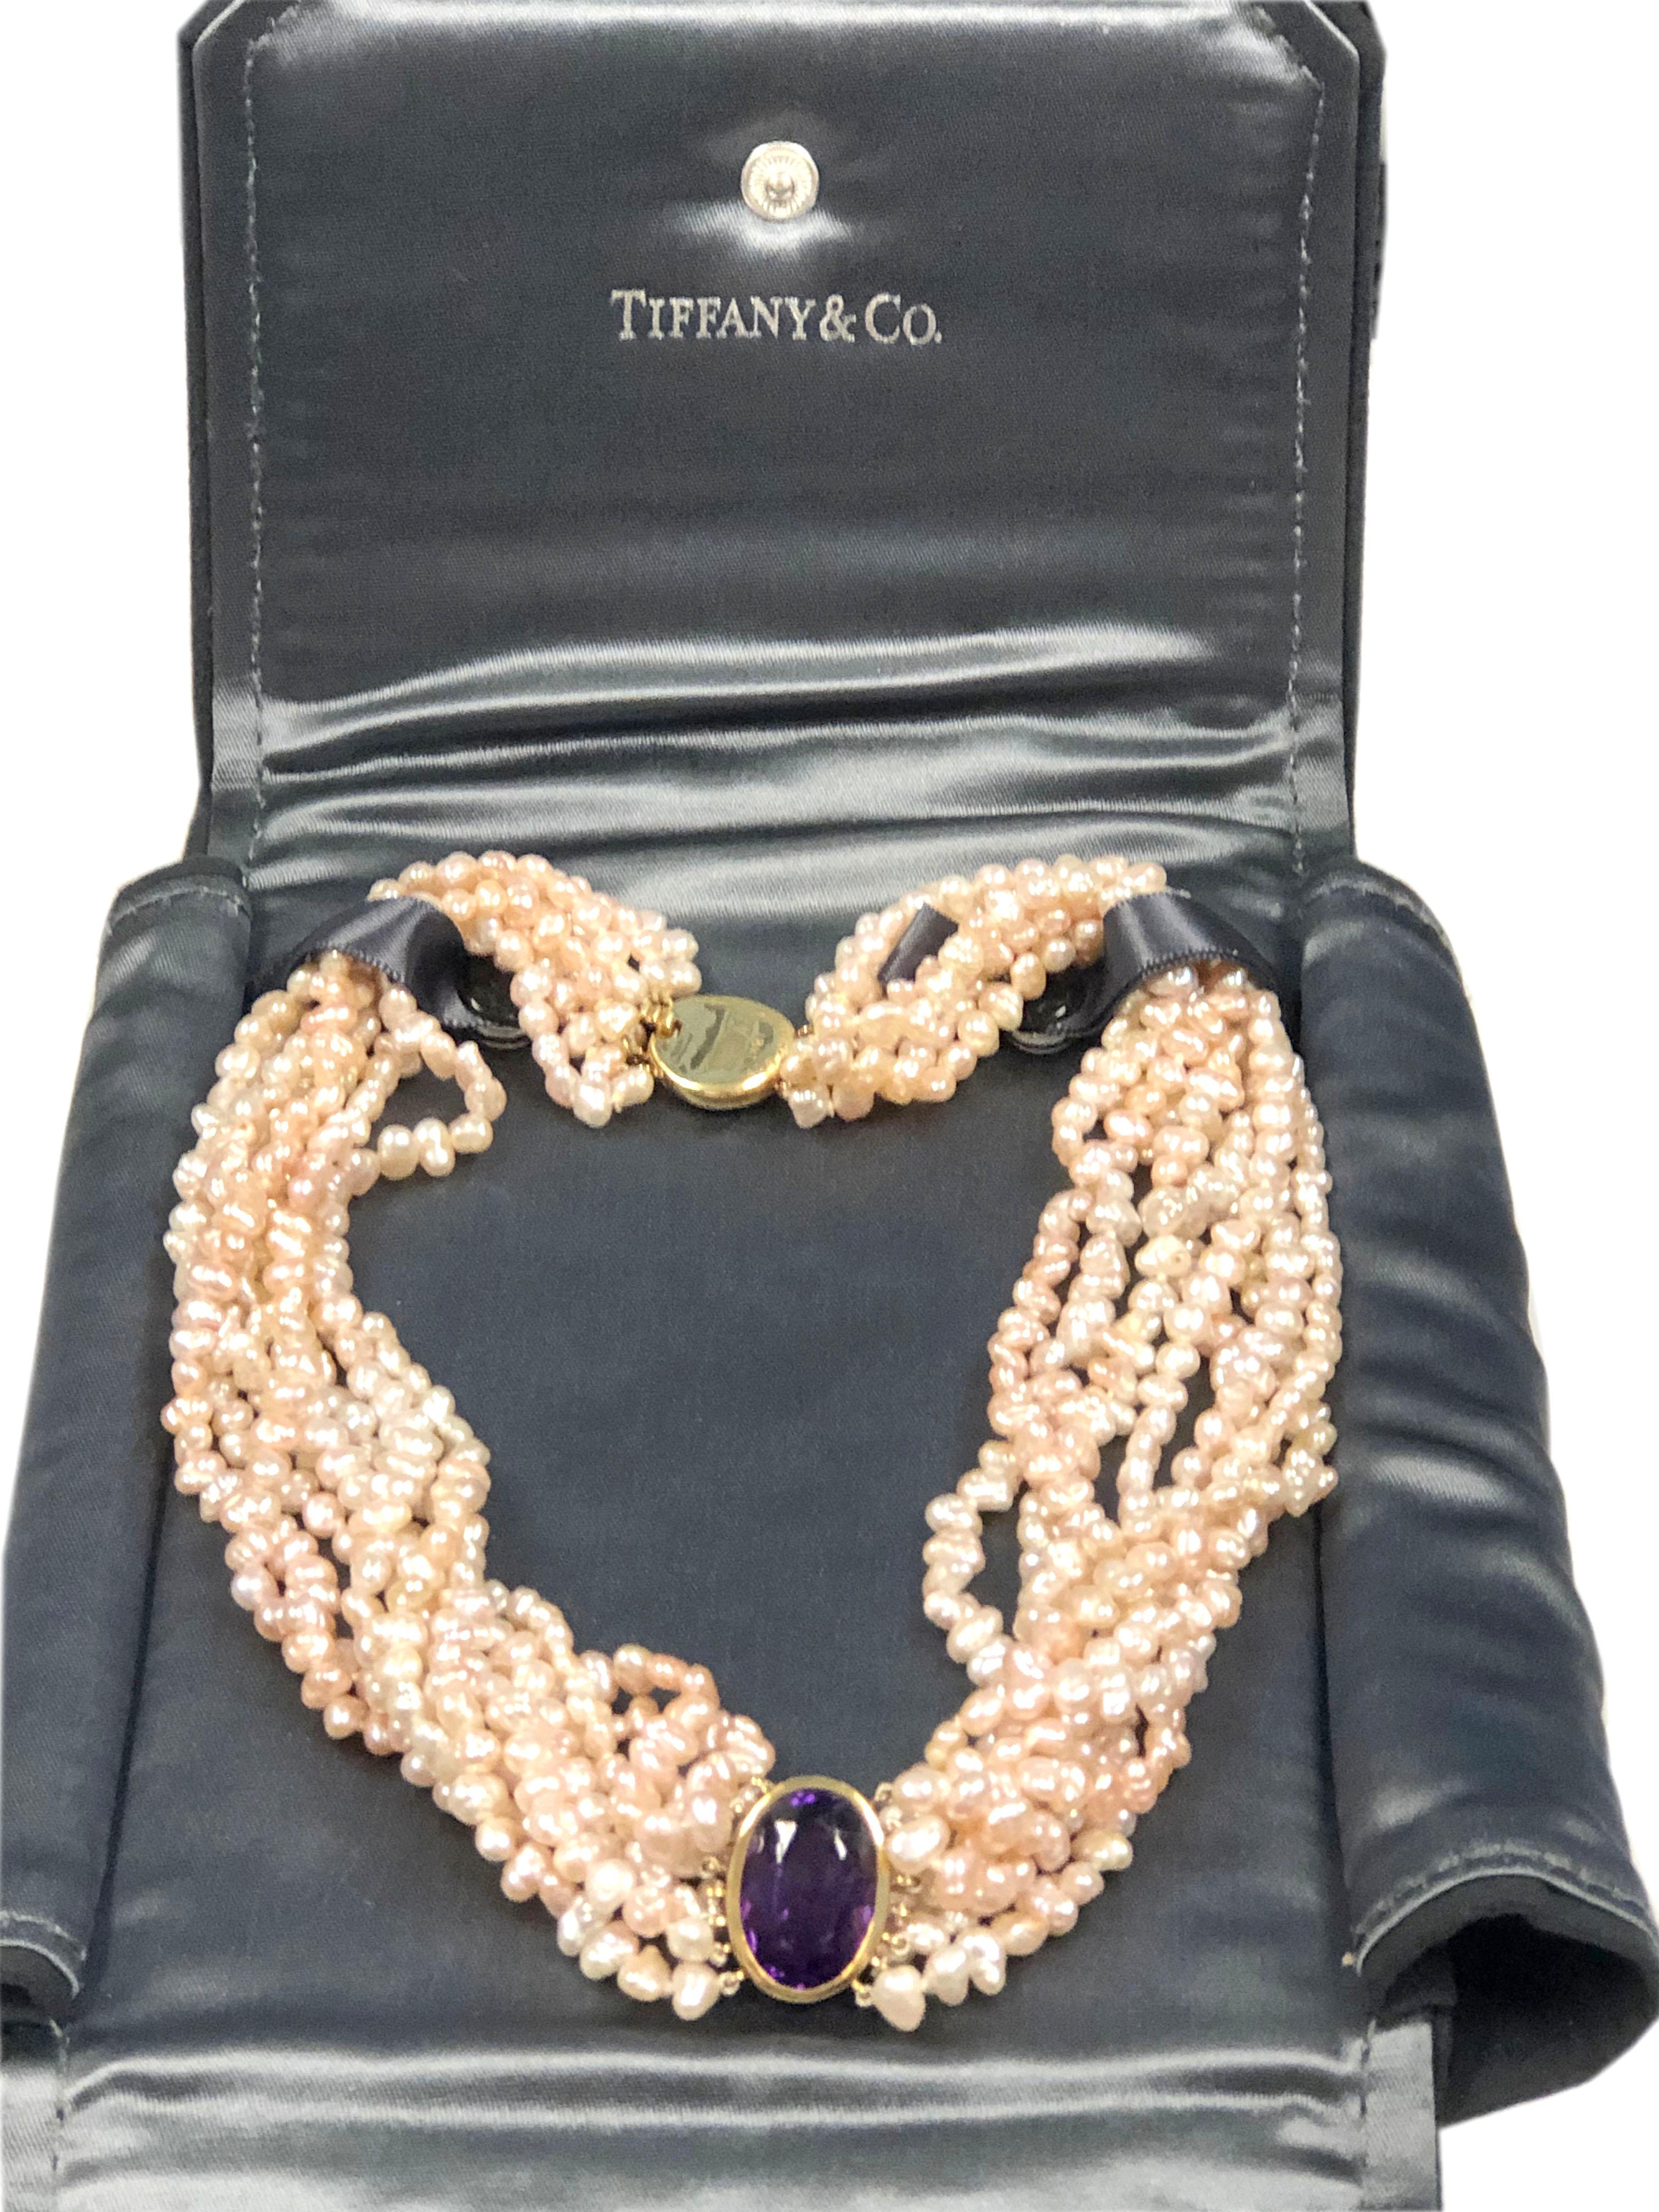 Tiffany & Company Gold Amethyst and Pearl Torasde Necklace 2